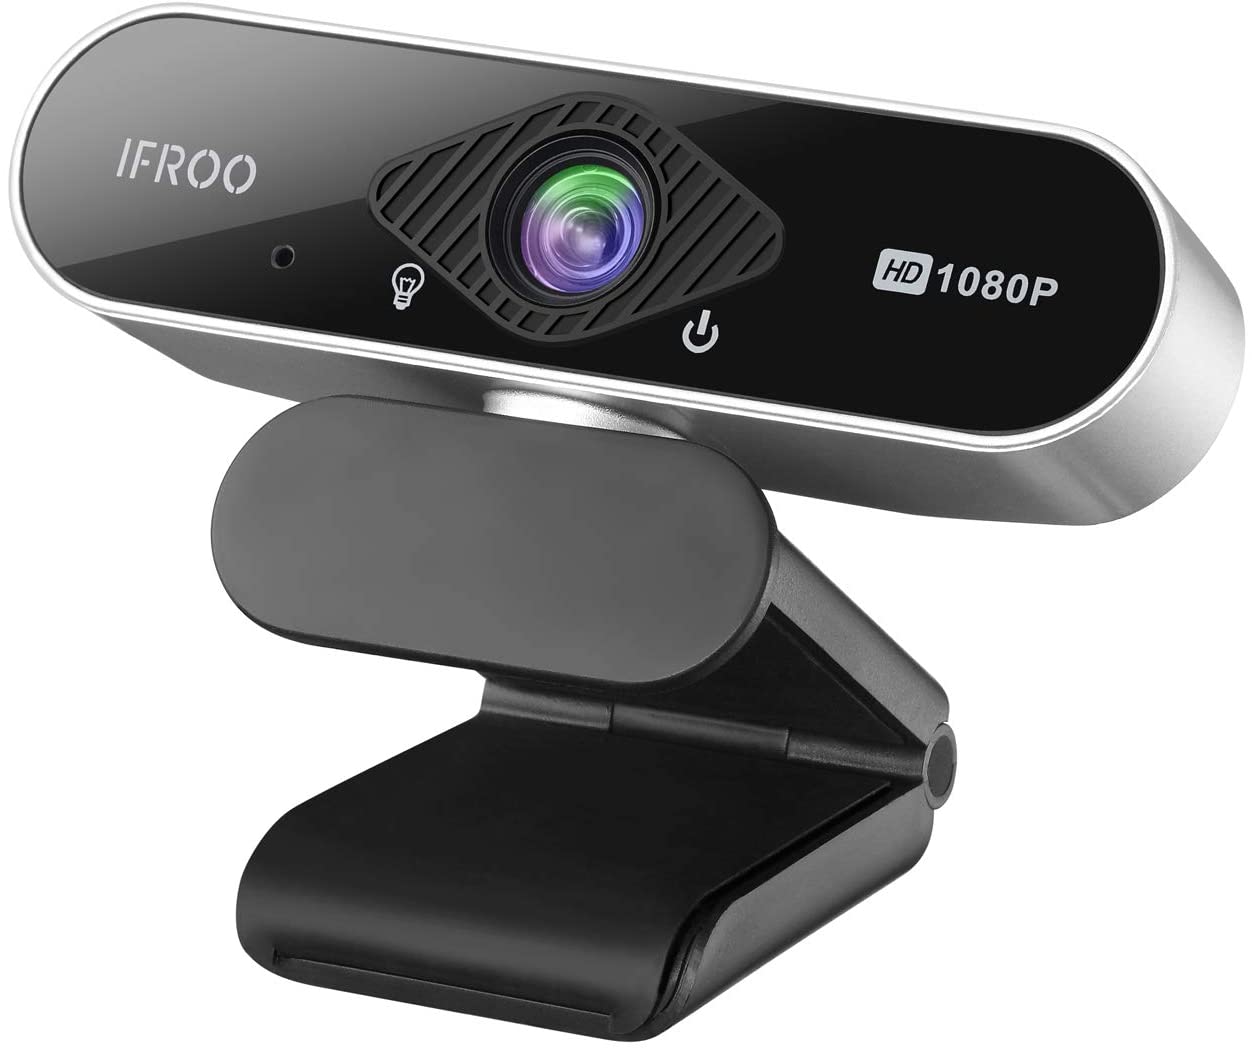 Ifroo - best webcam for Youtube